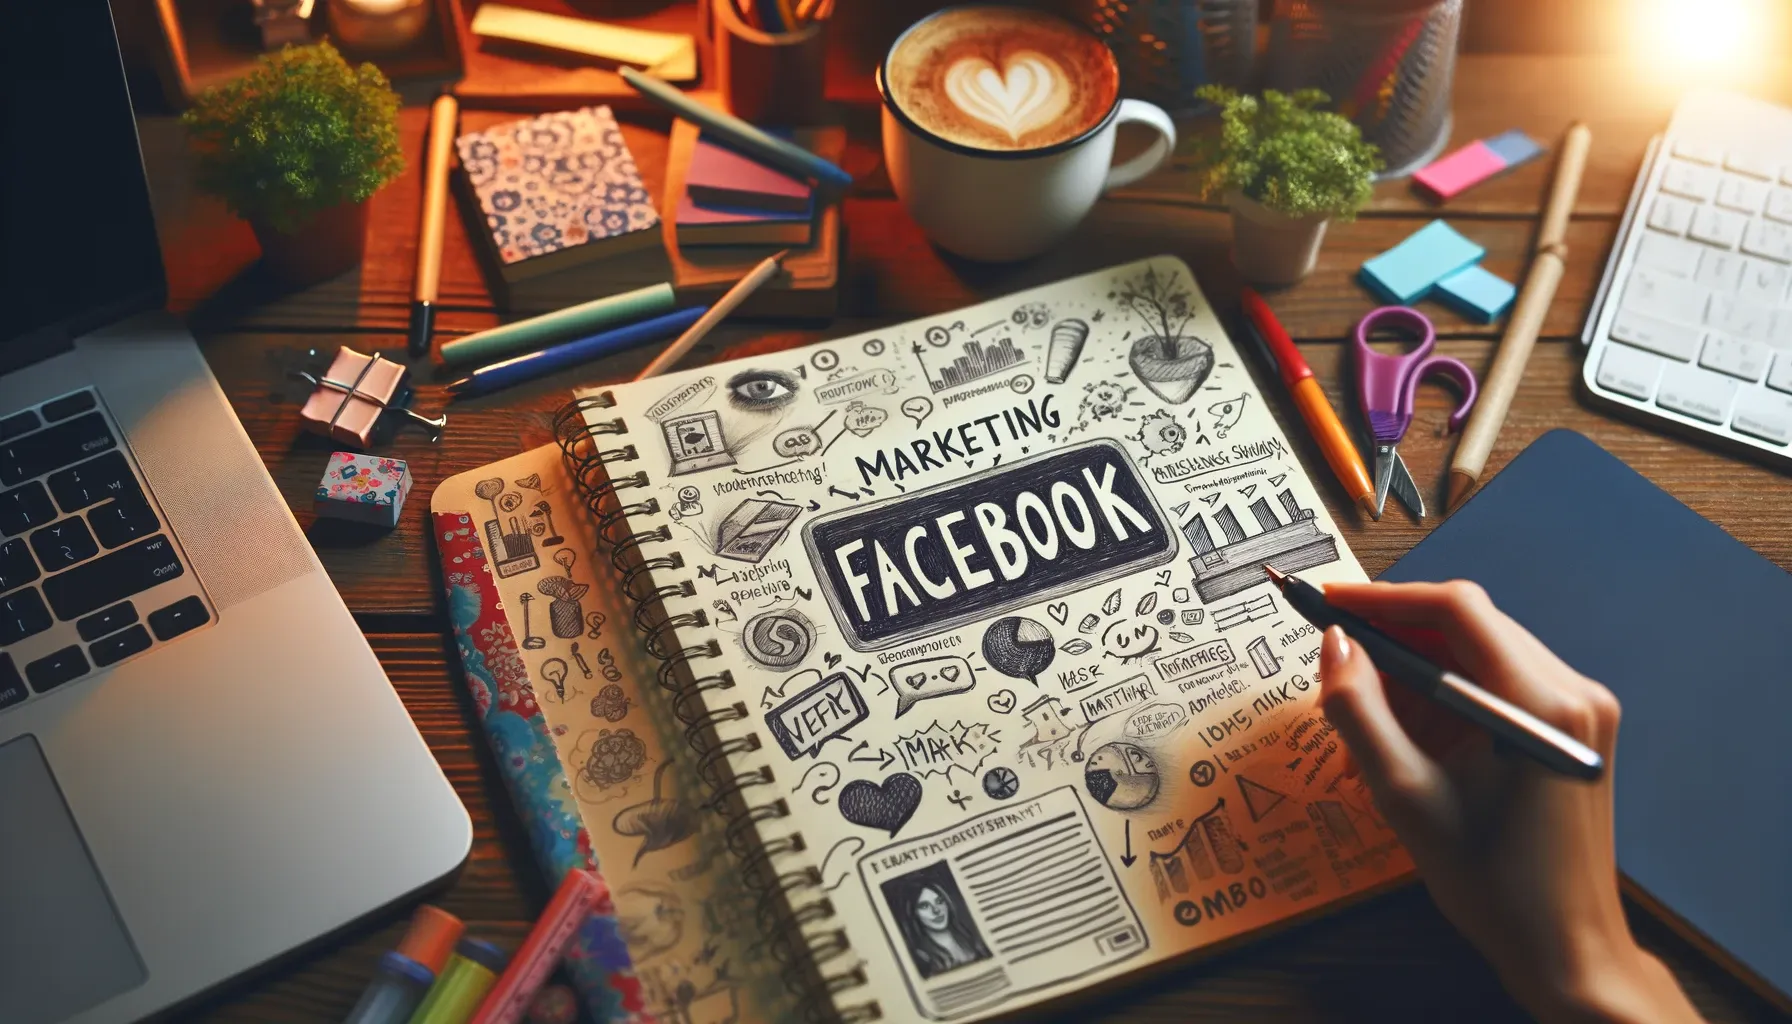 Setting Up a Facebook Business Page for Small Businesses